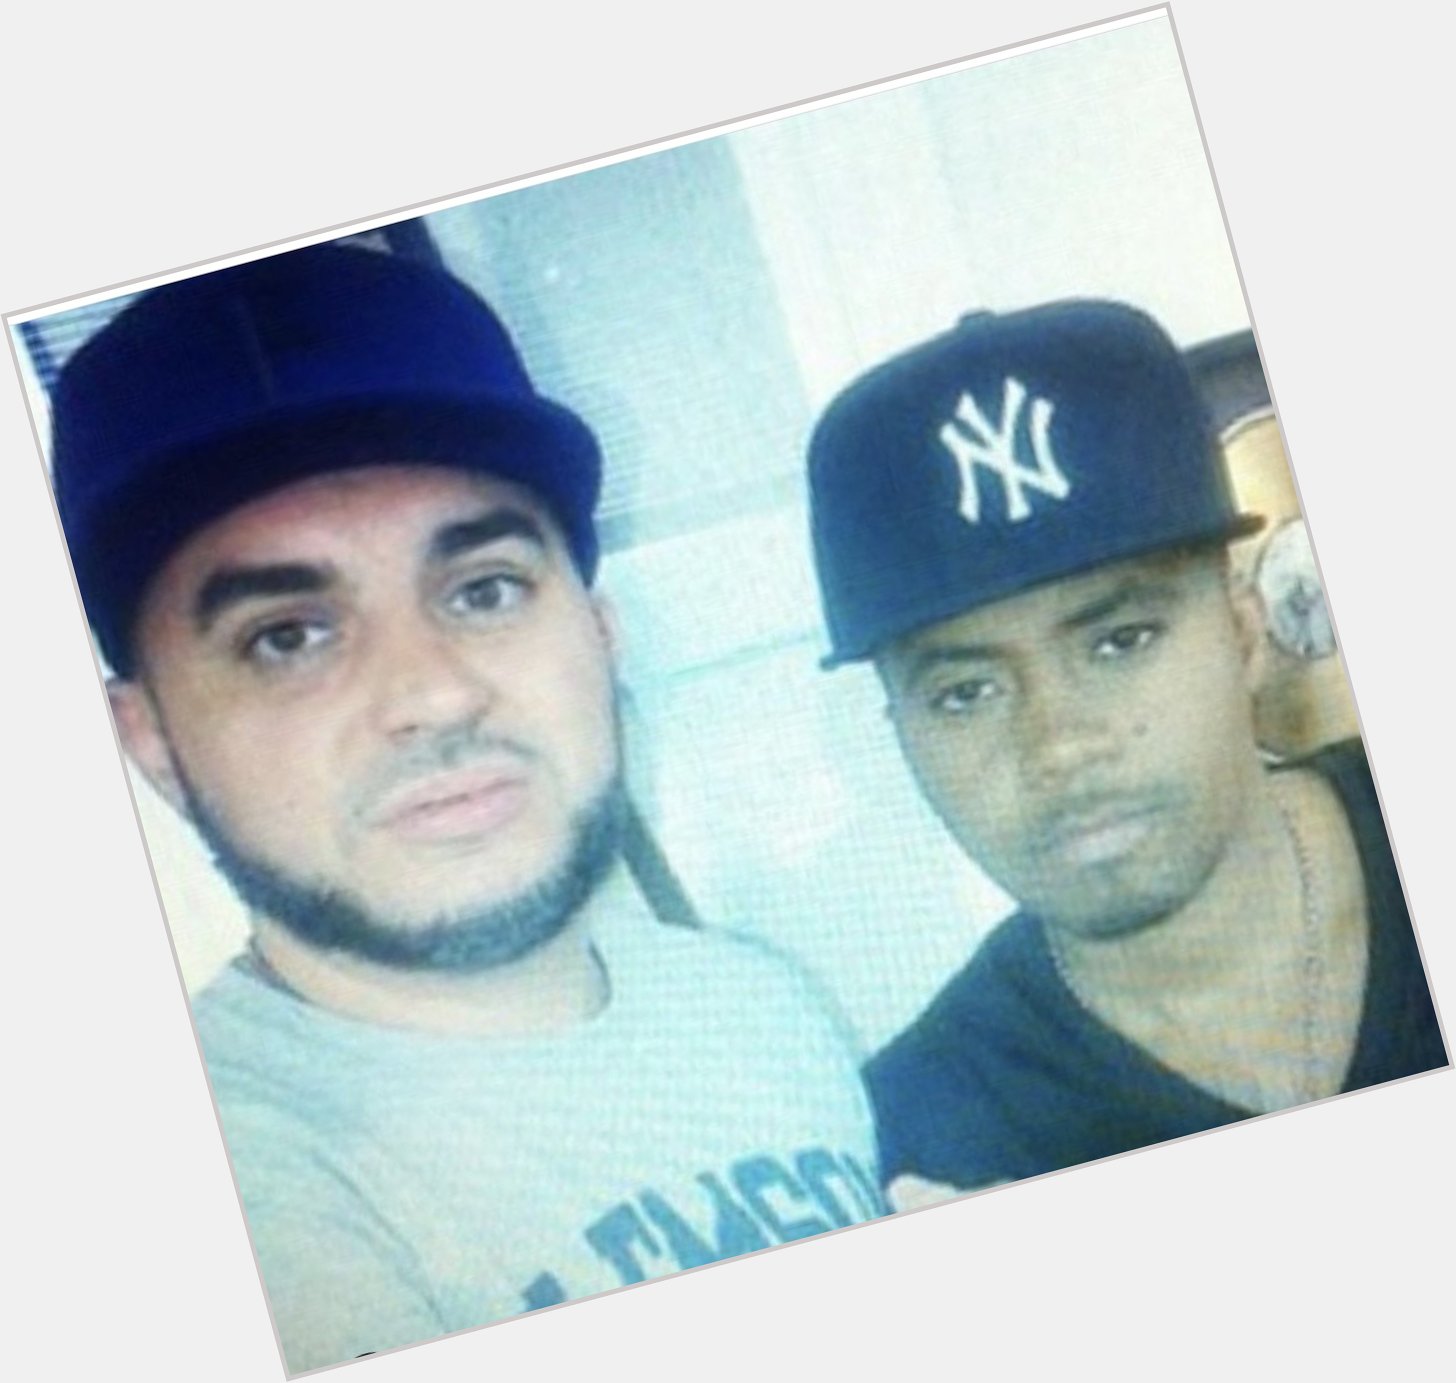 HAPPY BIRTHDAY TO MY VIRGO BROTHER, THE ONE AND ONLY NASTY NAS!! 